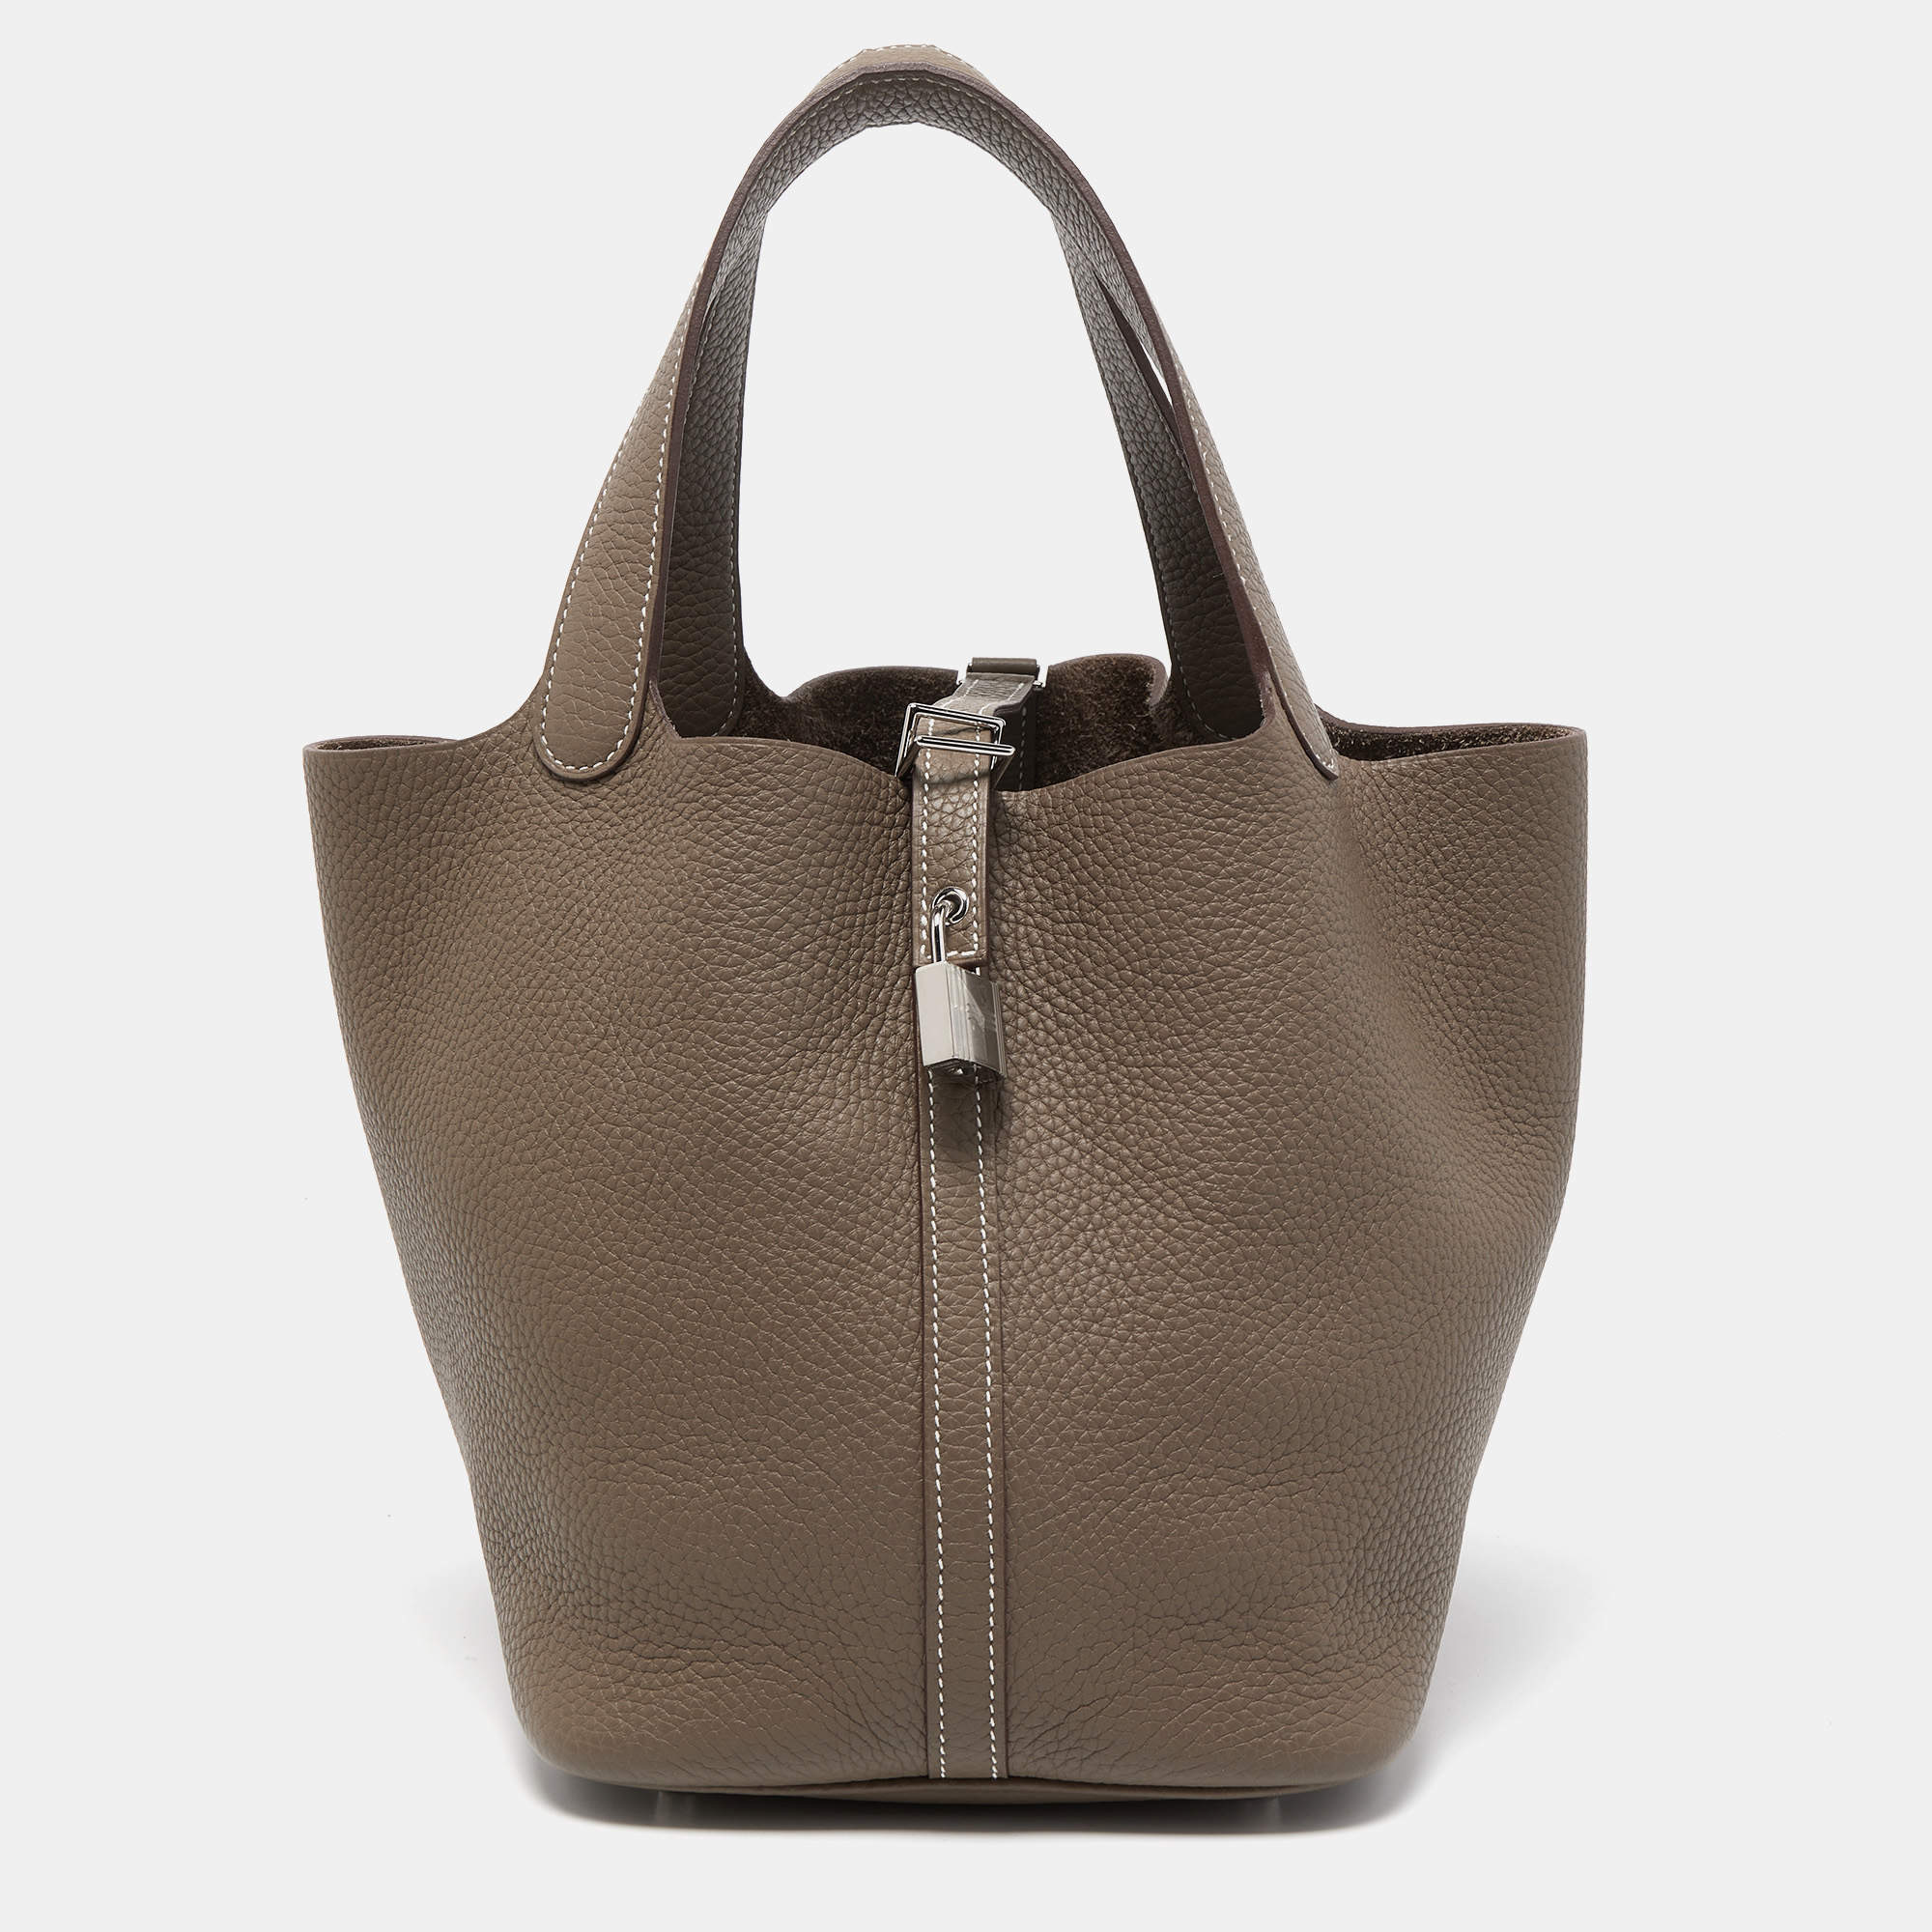 Shop HERMES Picotin Casual Style Street Style 2WAY Plain Leather